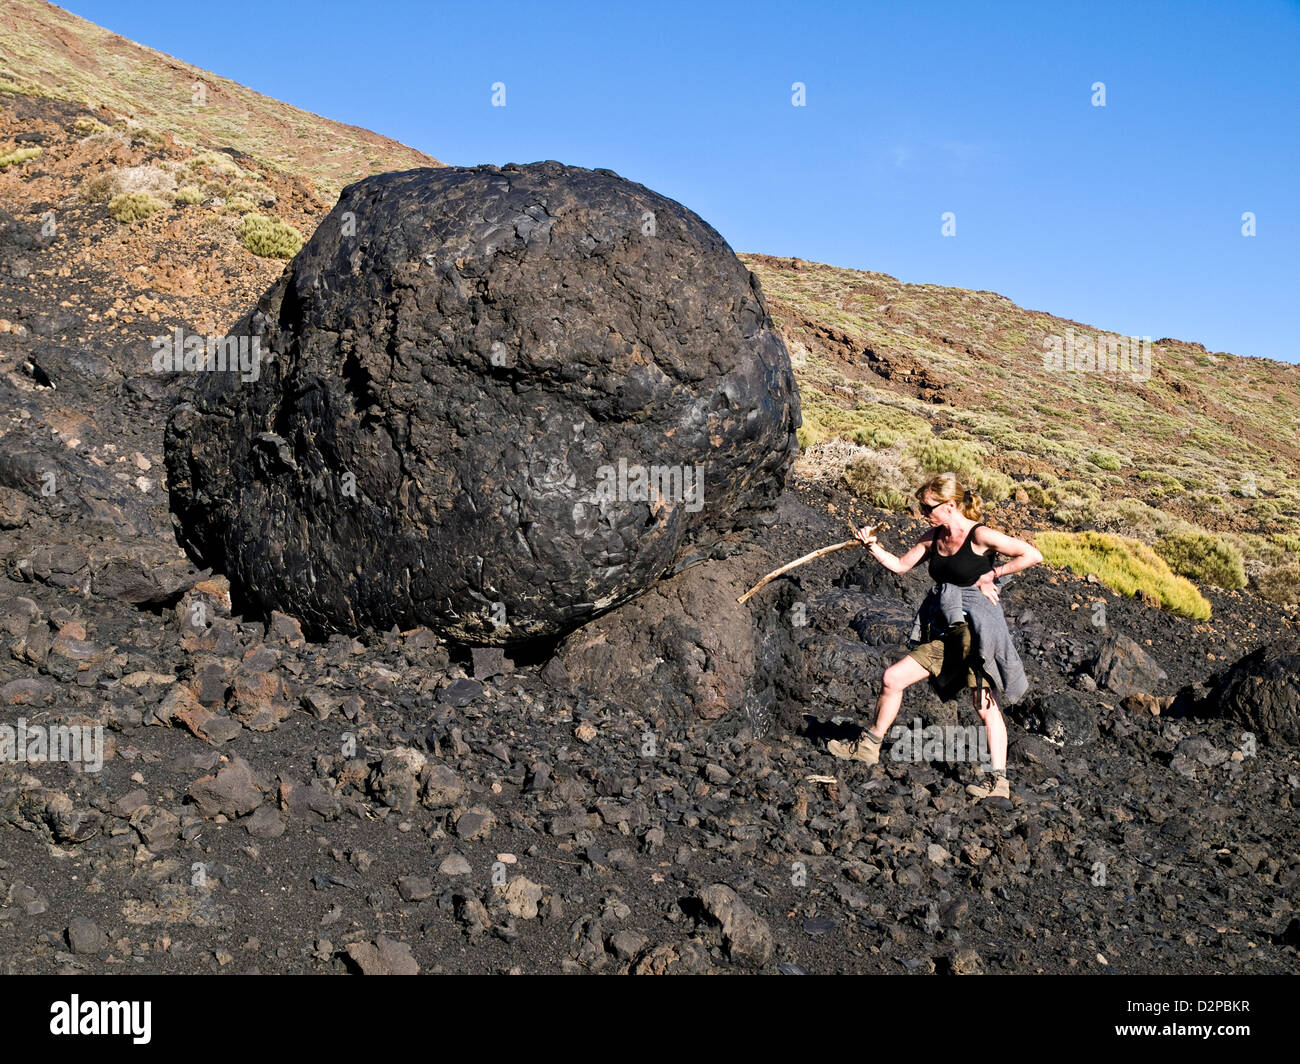 One of 'Teide's eggs' on the flanks of Pico Viejo, Tenerife, Canary Islands, Spain Stock Photo